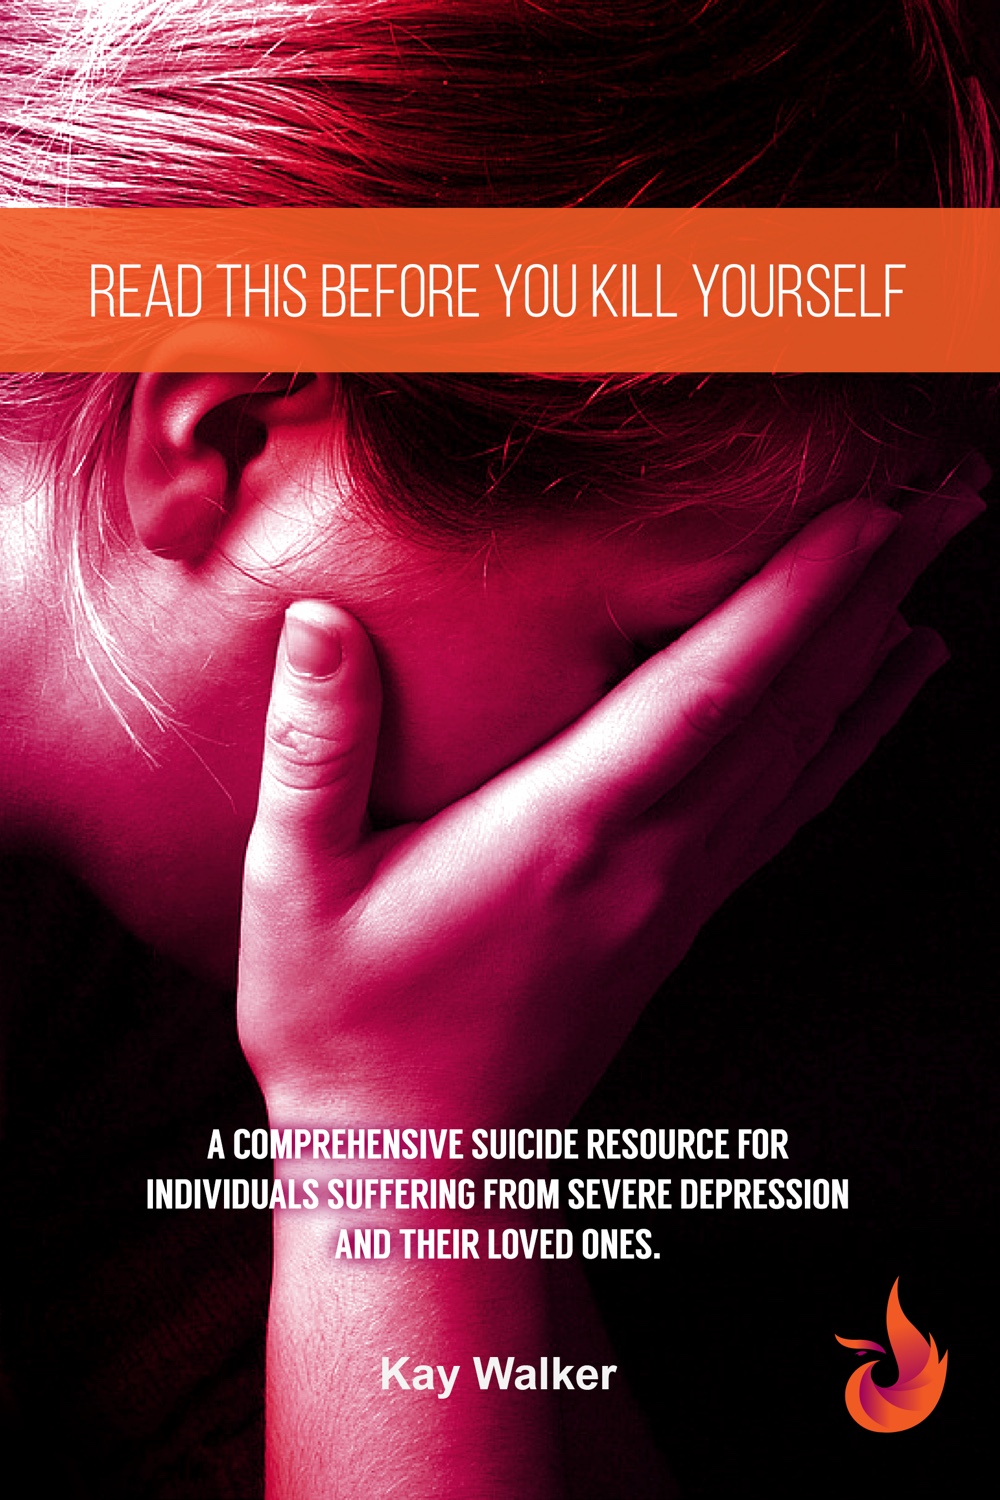 Cover of the new book for depression sufferers called Read This Before You Kill Yourself by Kay Walker